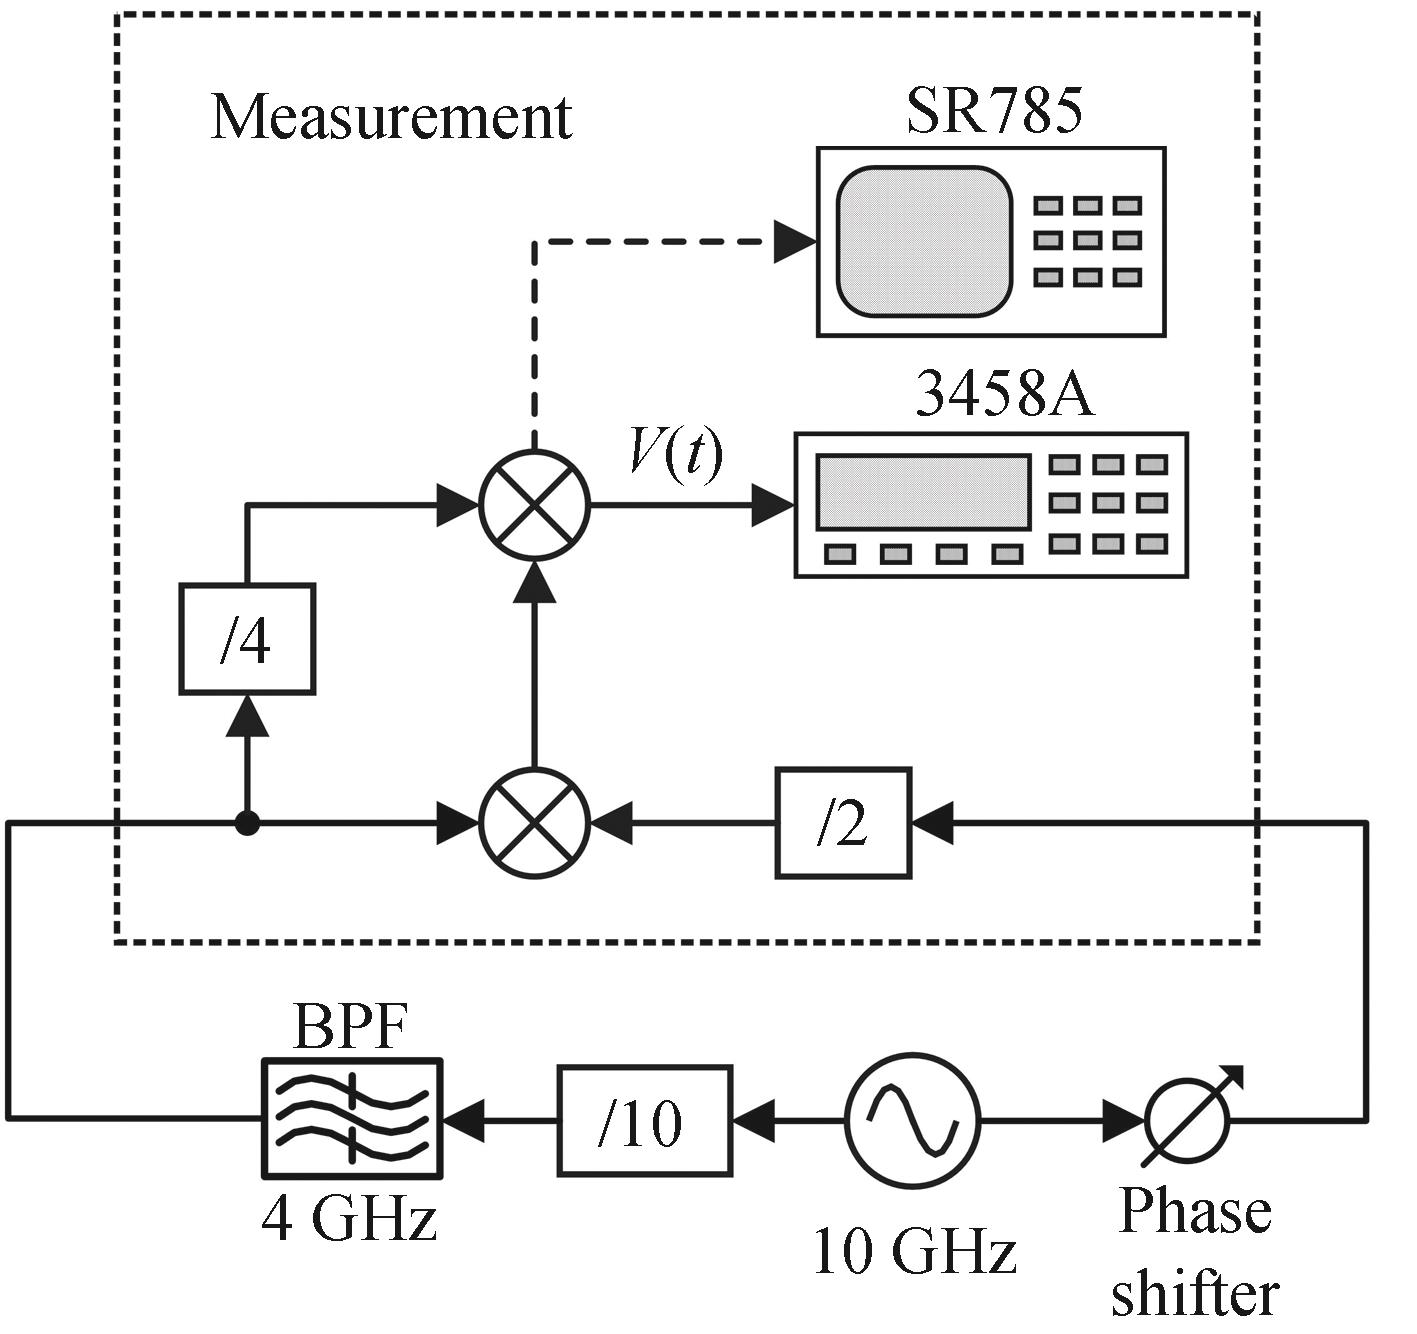 Test module for phase delay and residual phase noise